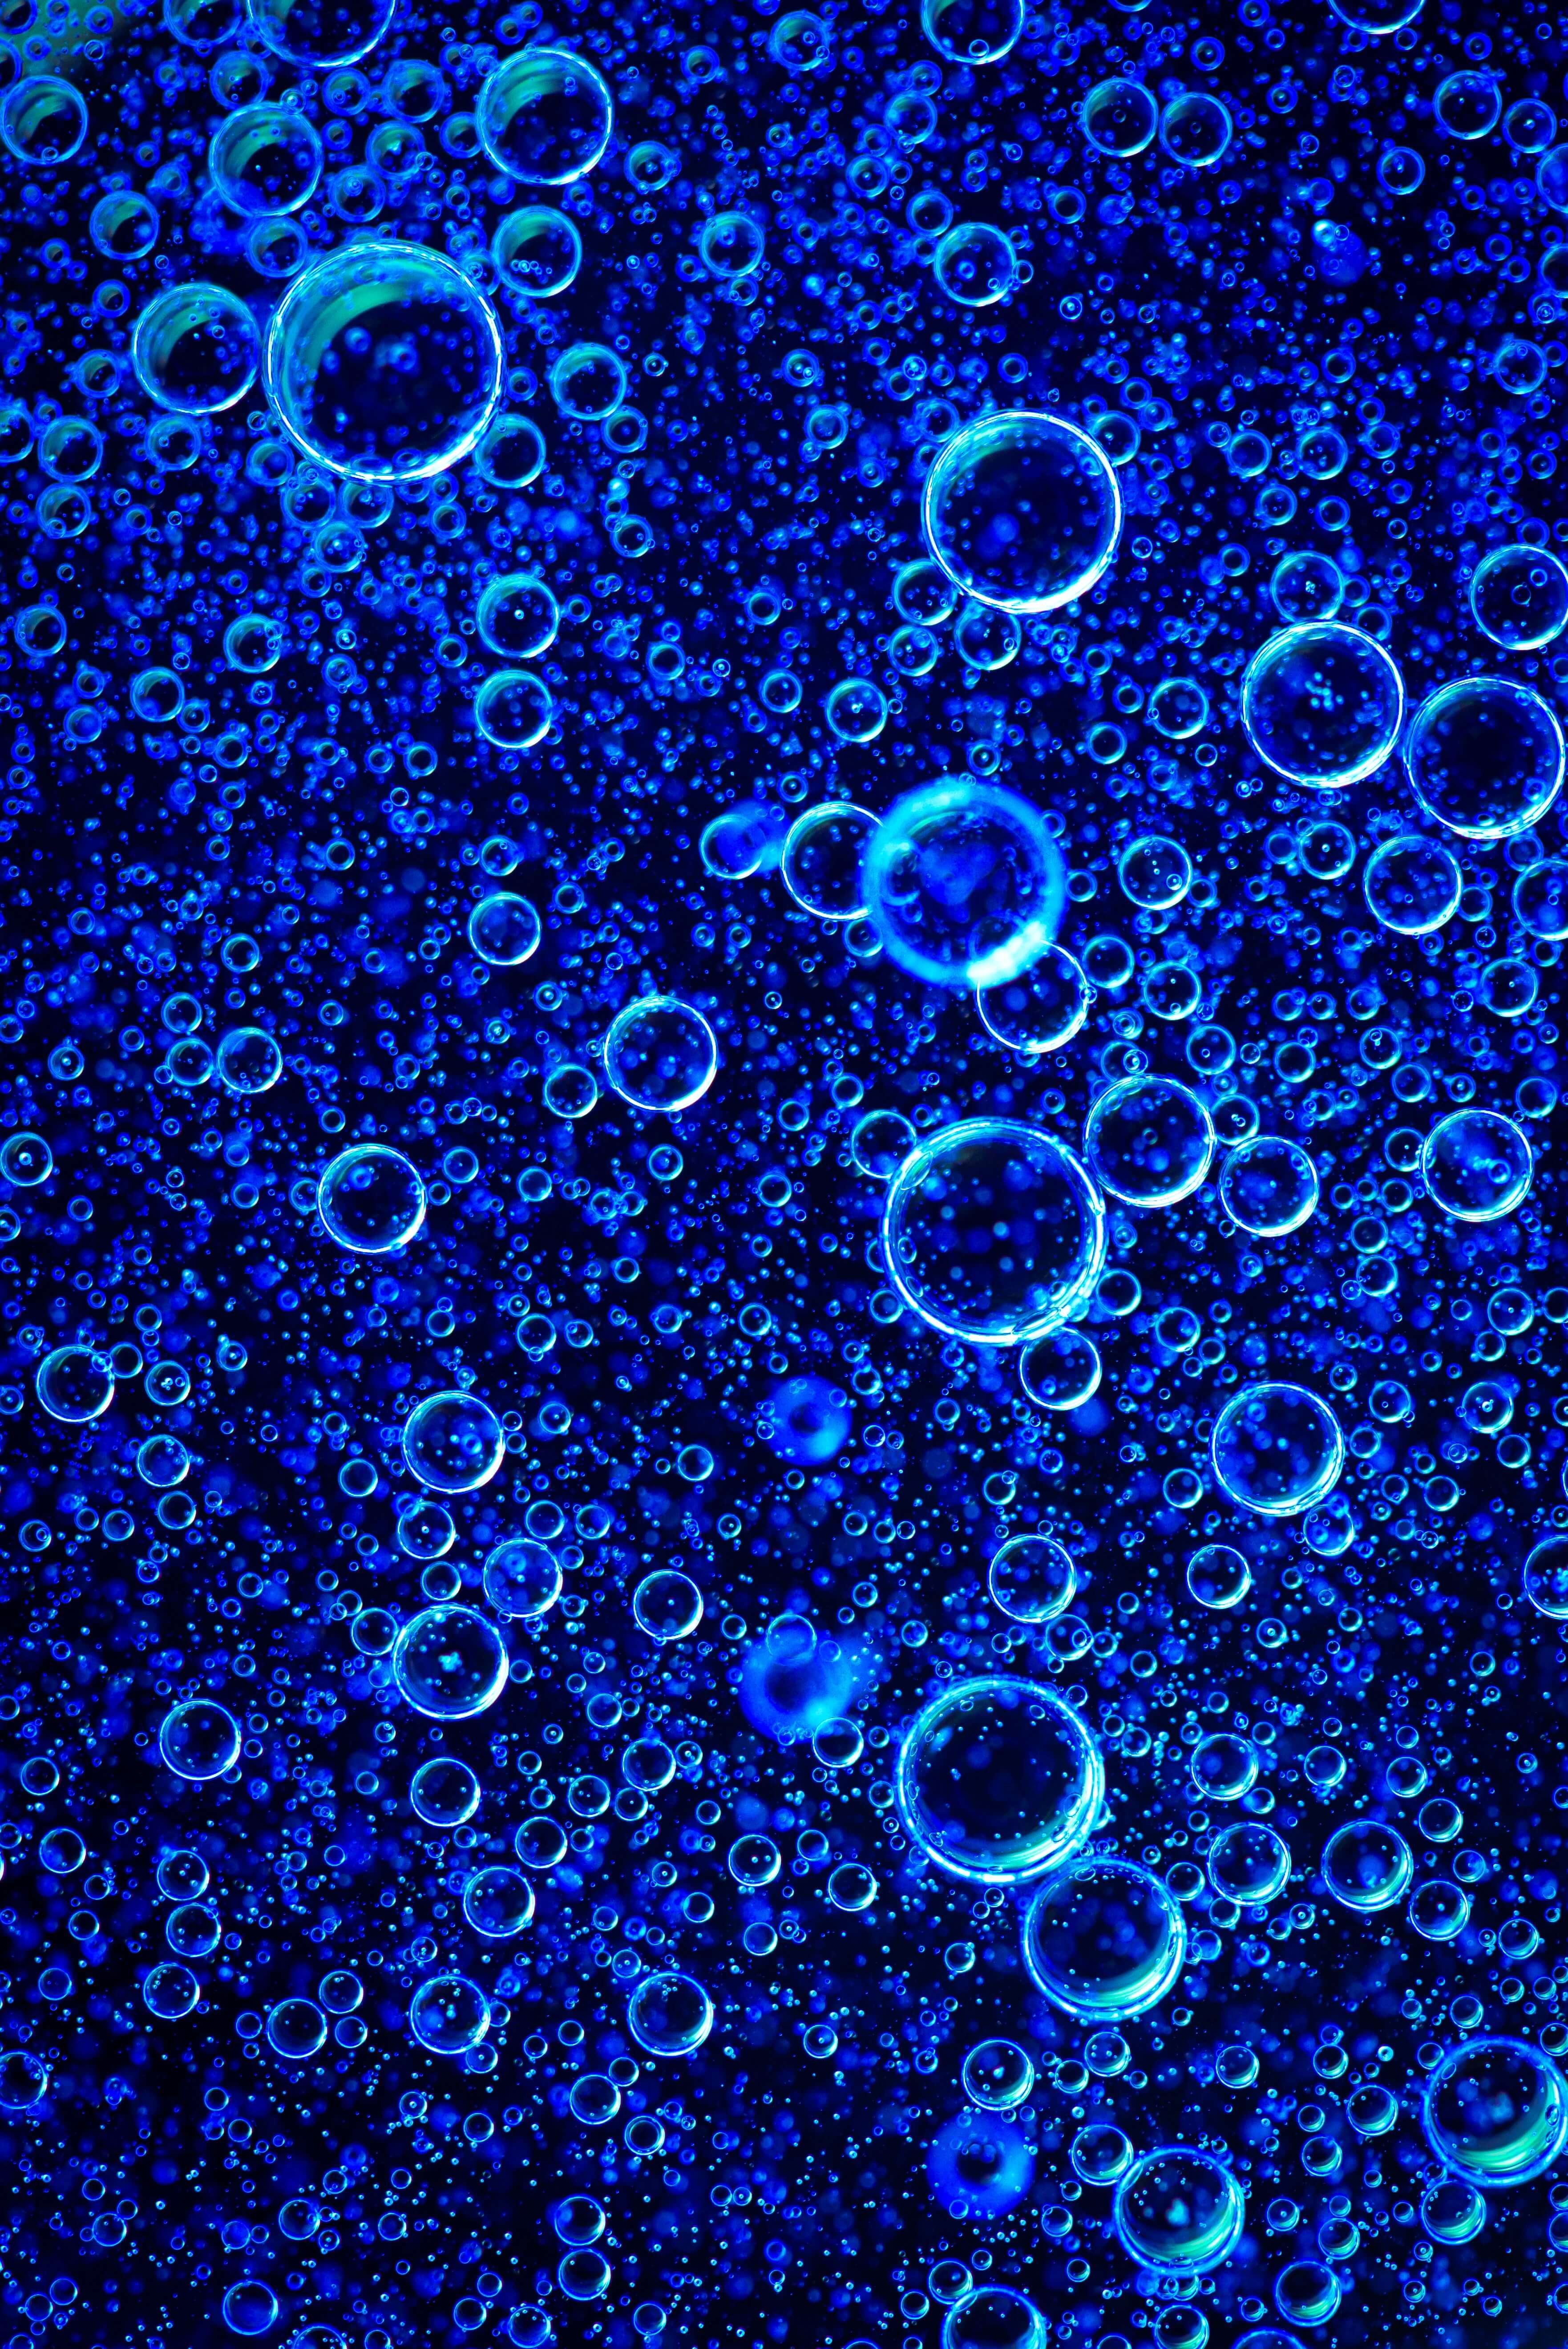 Three Unique Properties Enable Sustainable Wastewater Treatment Using Nanobubbles